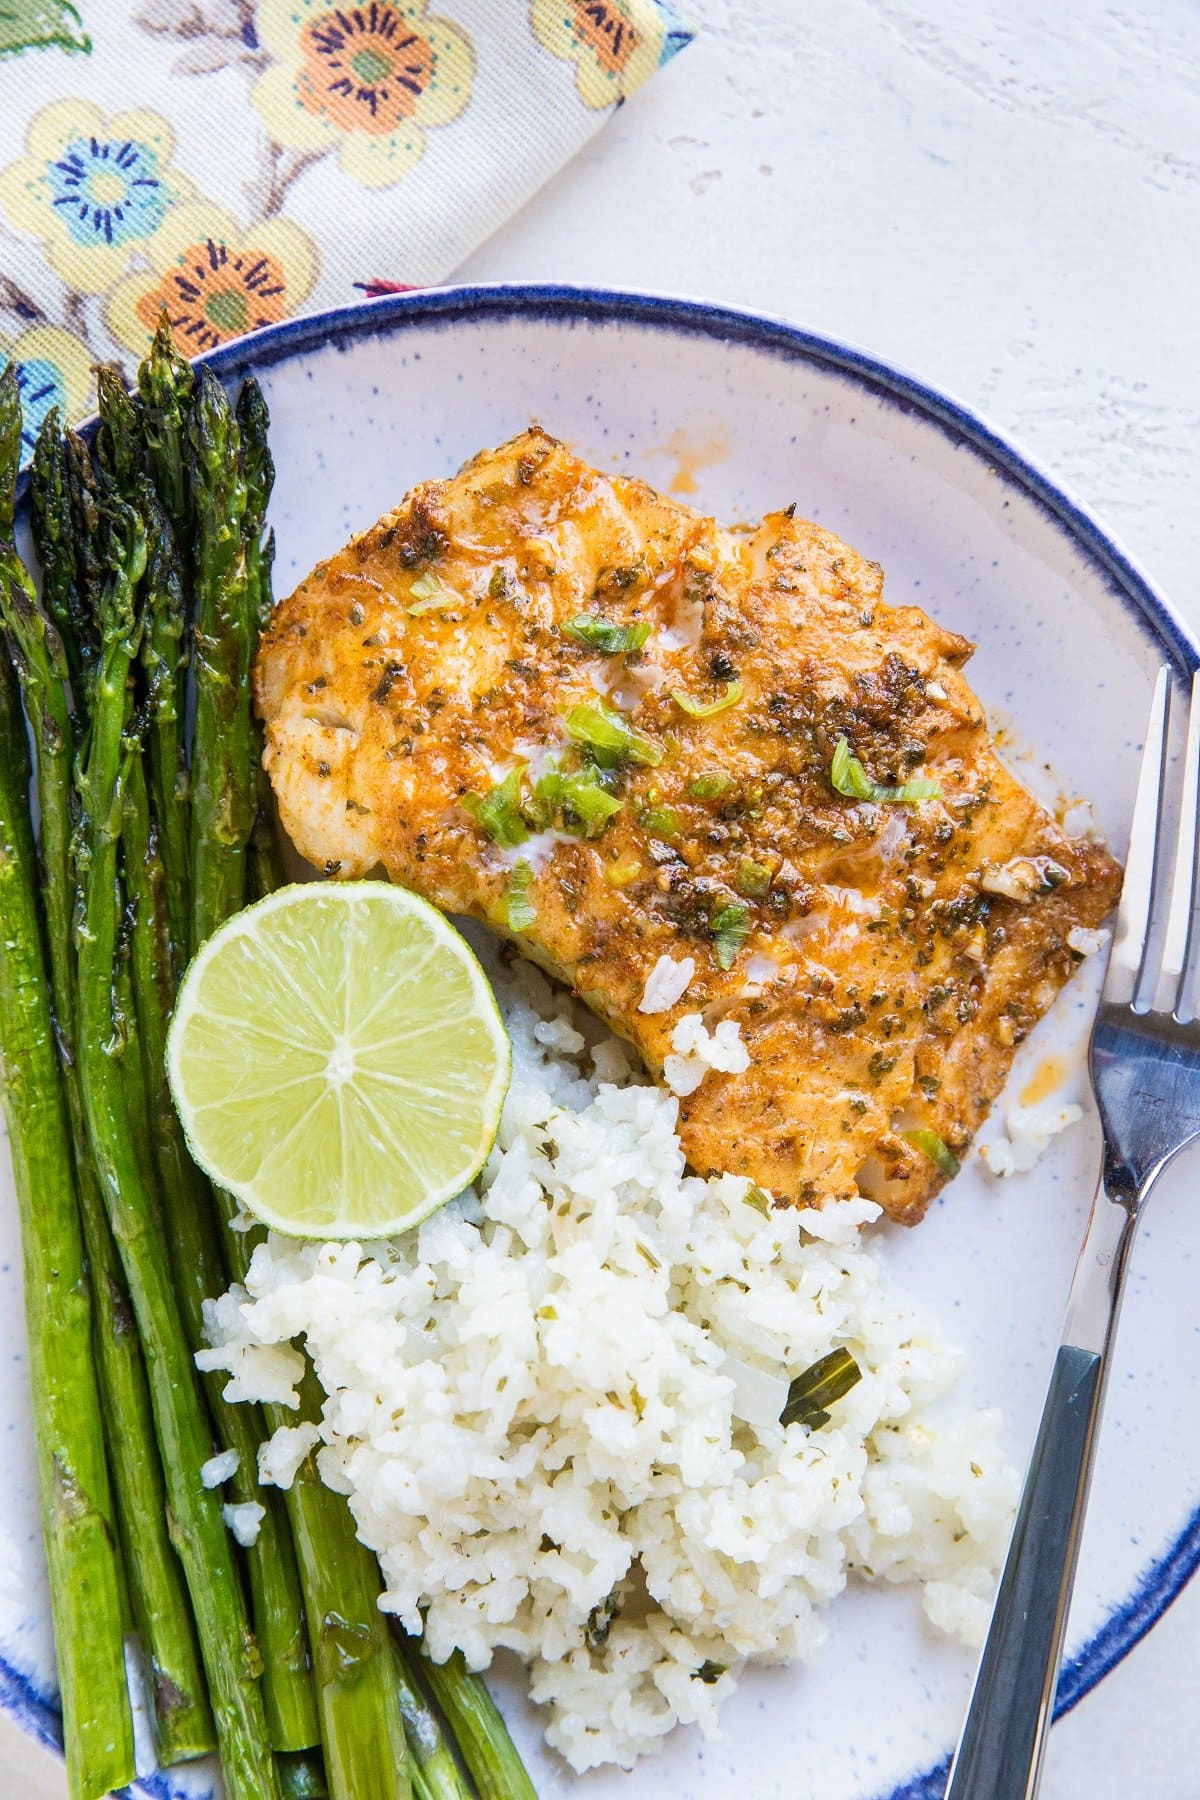 Chili Lime Baked Cod is a keto-friendly paleo low-carb dinner recipe that requires hardly any time to prepare. 